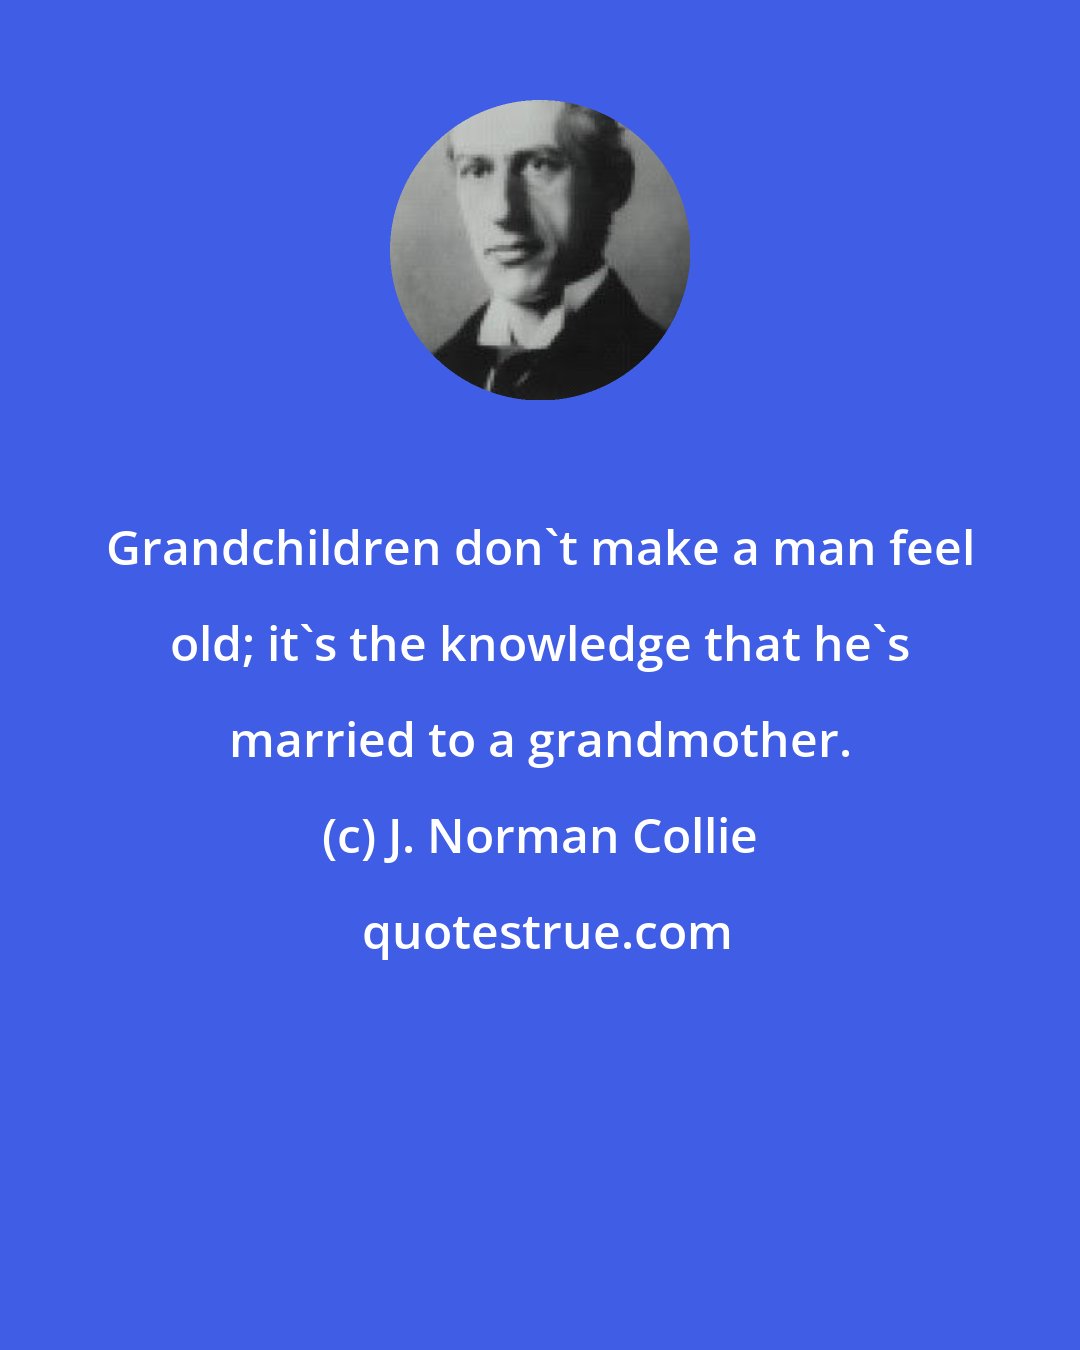 J. Norman Collie: Grandchildren don't make a man feel old; it's the knowledge that he's married to a grandmother.